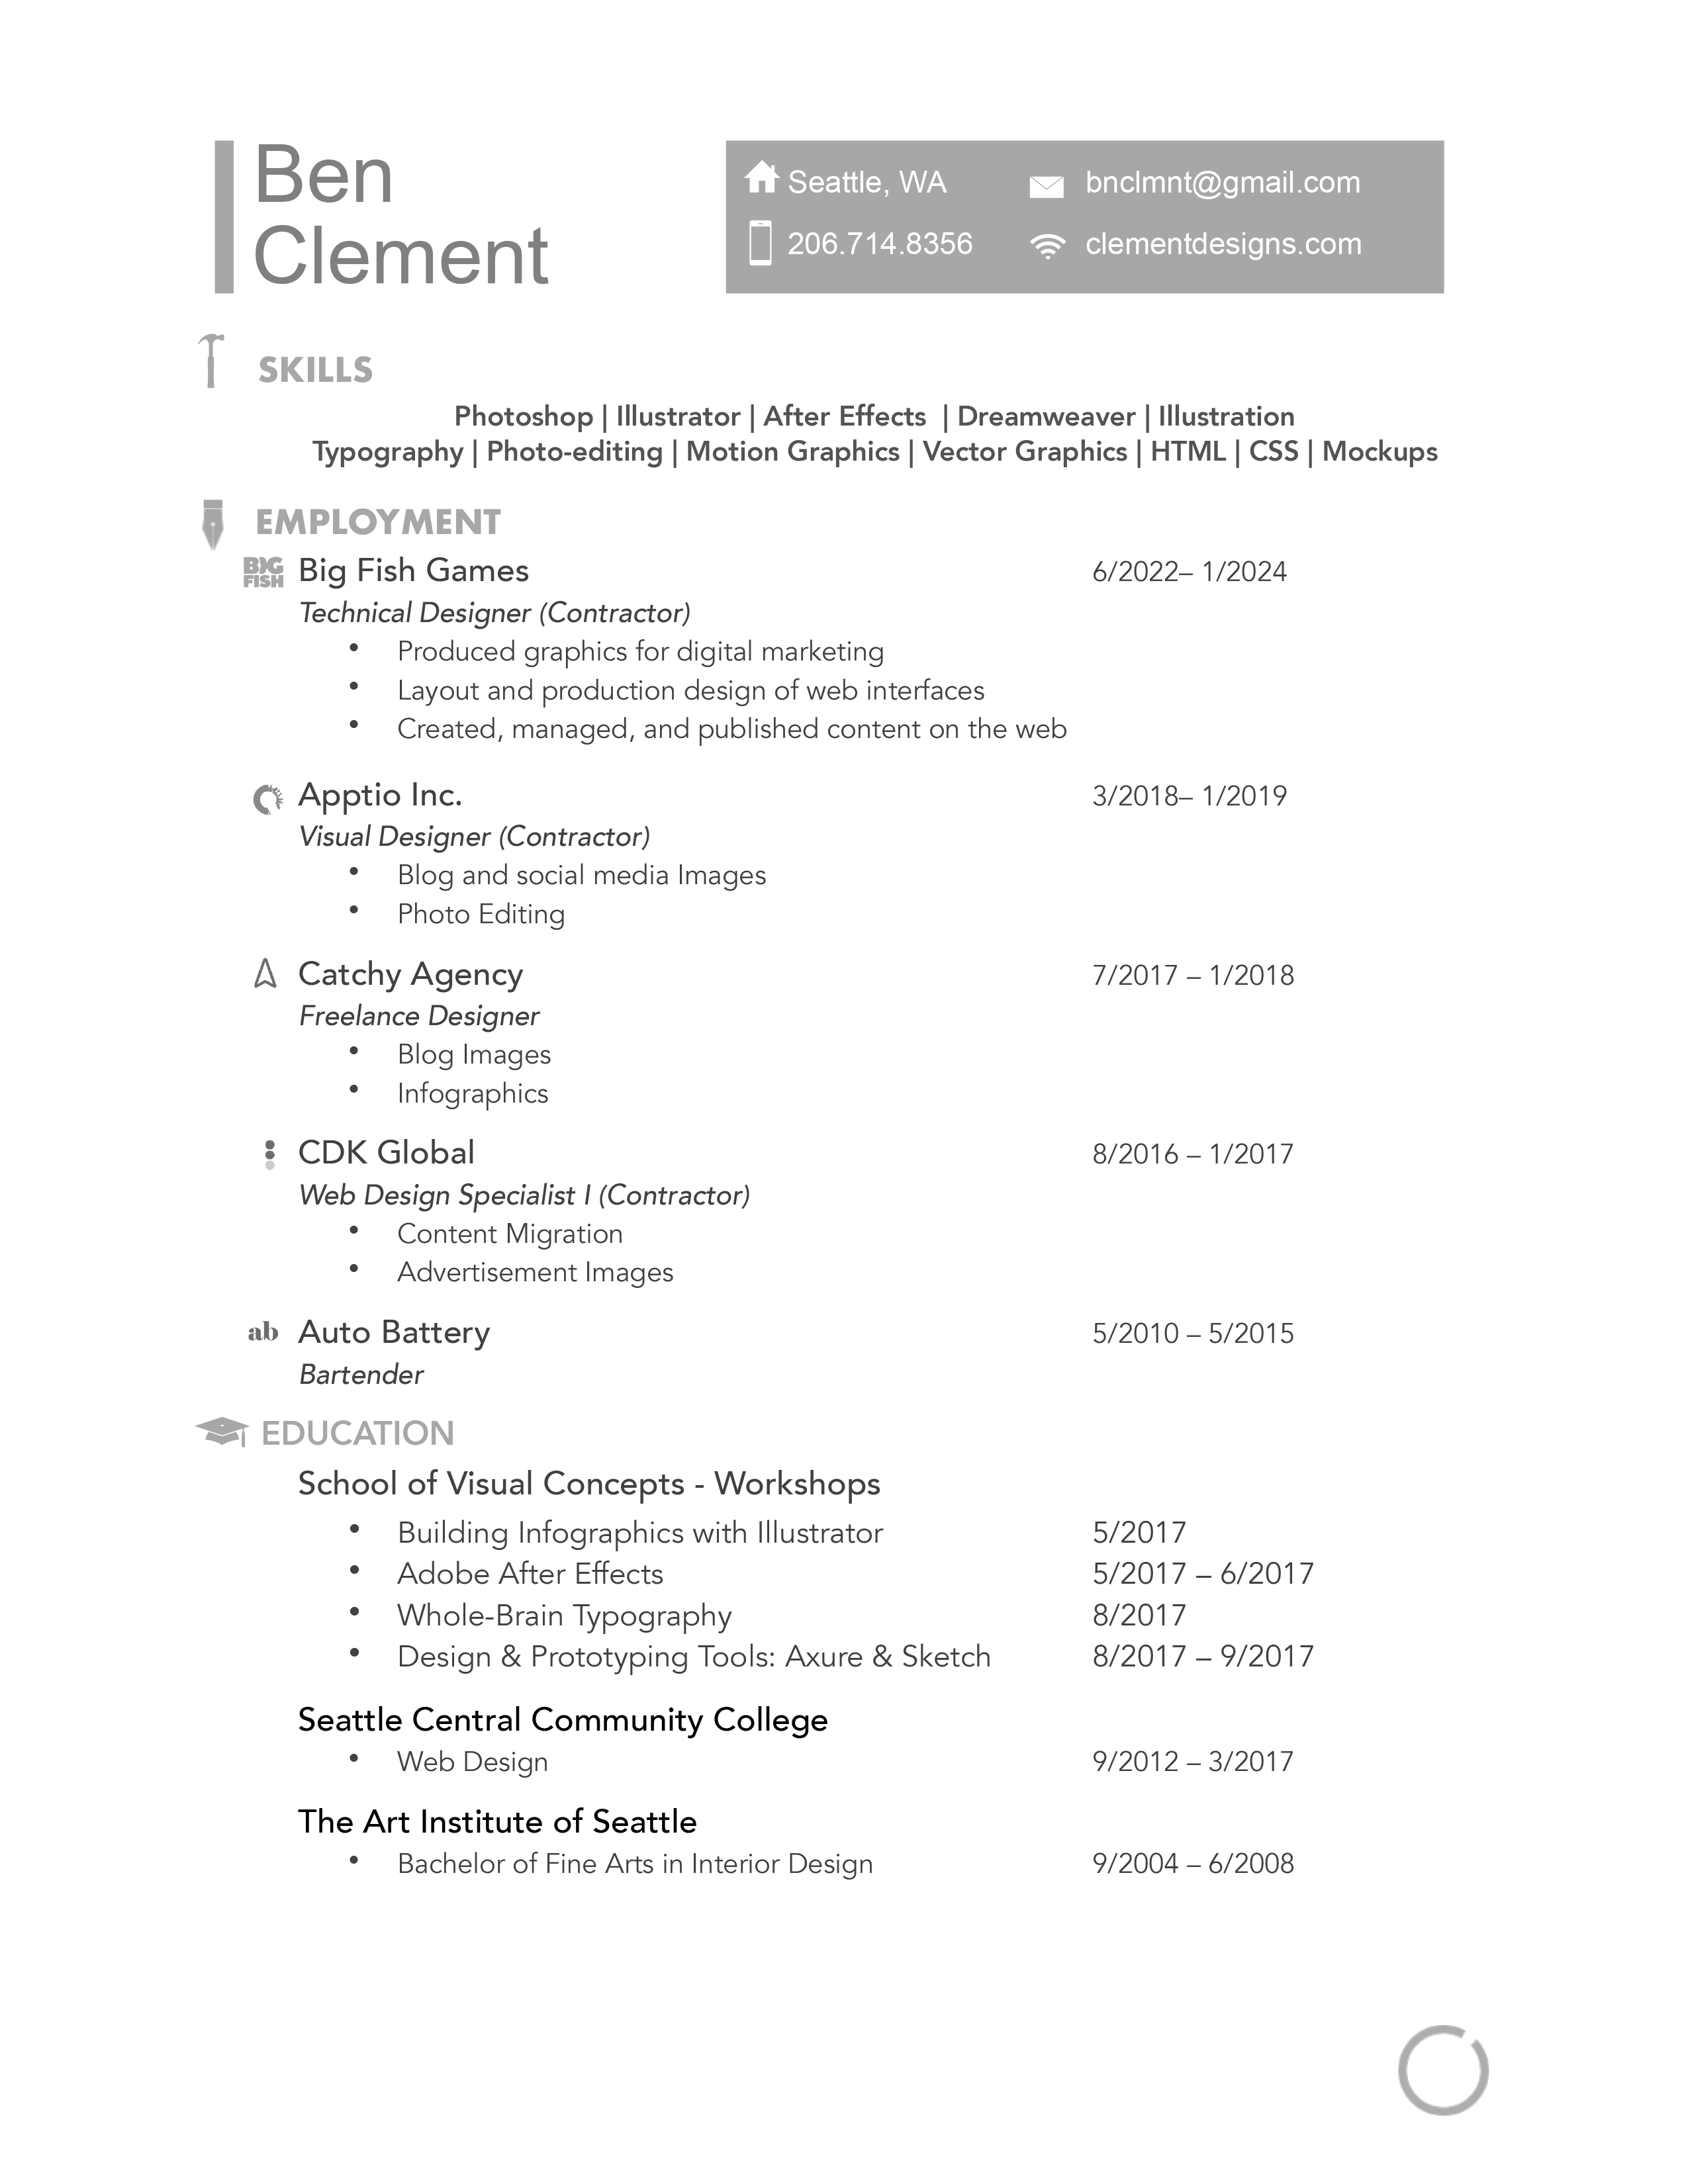 Clement Resume